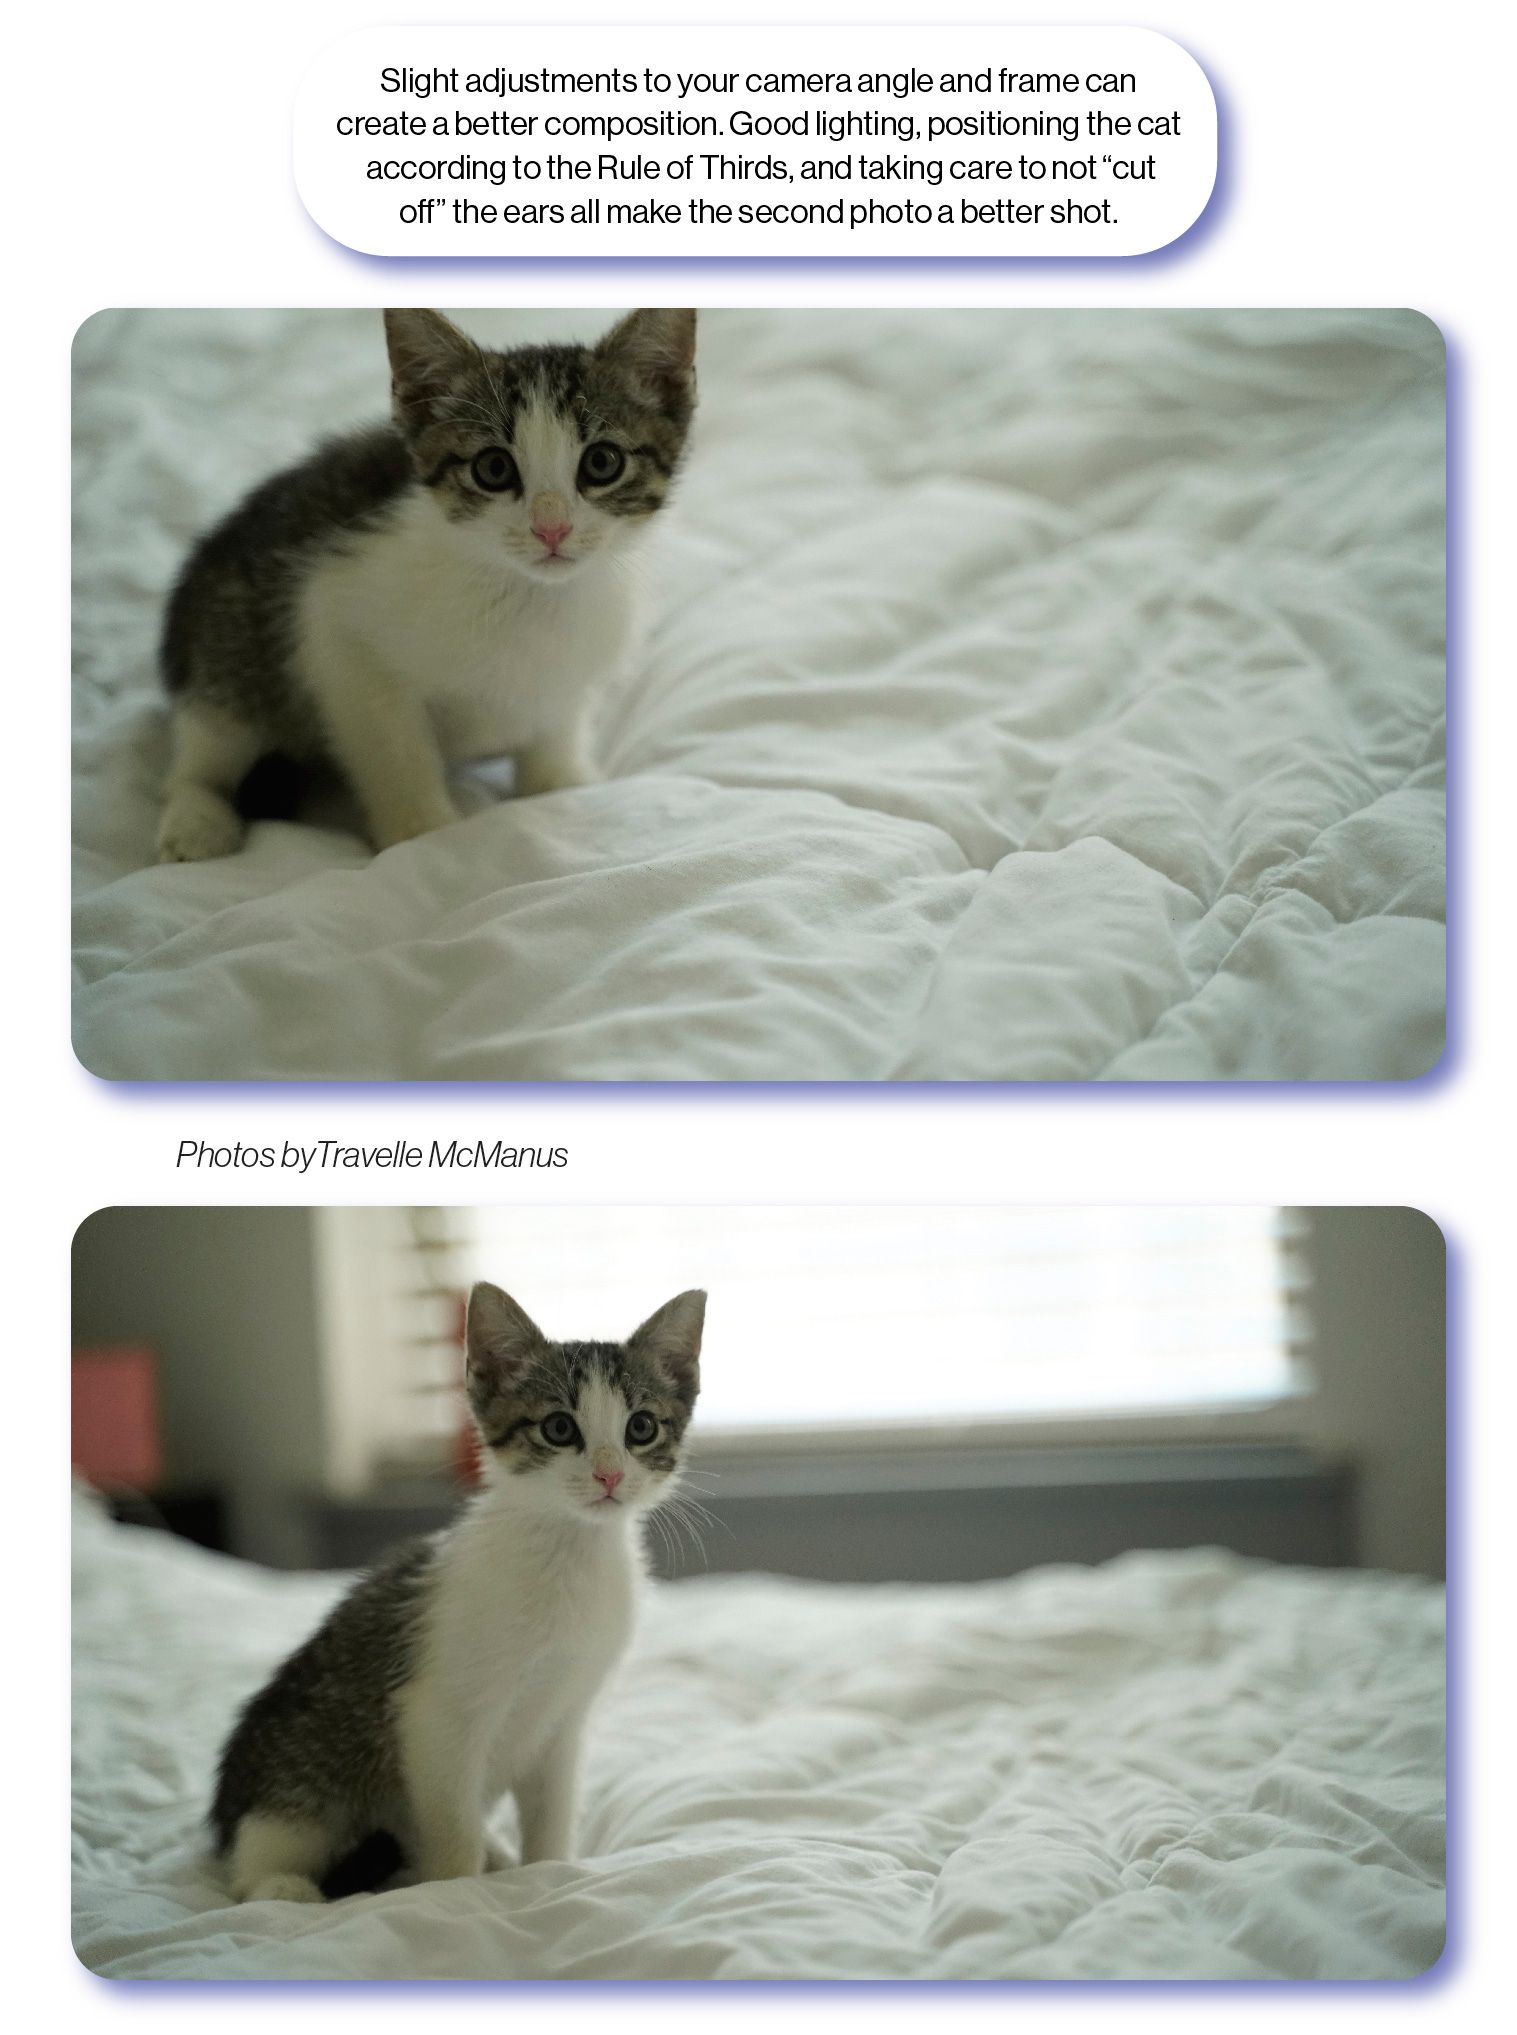 Images: Two similar photos of a kitten, with the SchoolCEO caption 'Slight adjustments to your camera angle and frame can create a better composition. Good lighting, positioning the cat according to the Rule of Thirds, and taking care to not cut off the ears all make the second photo a better shot.'